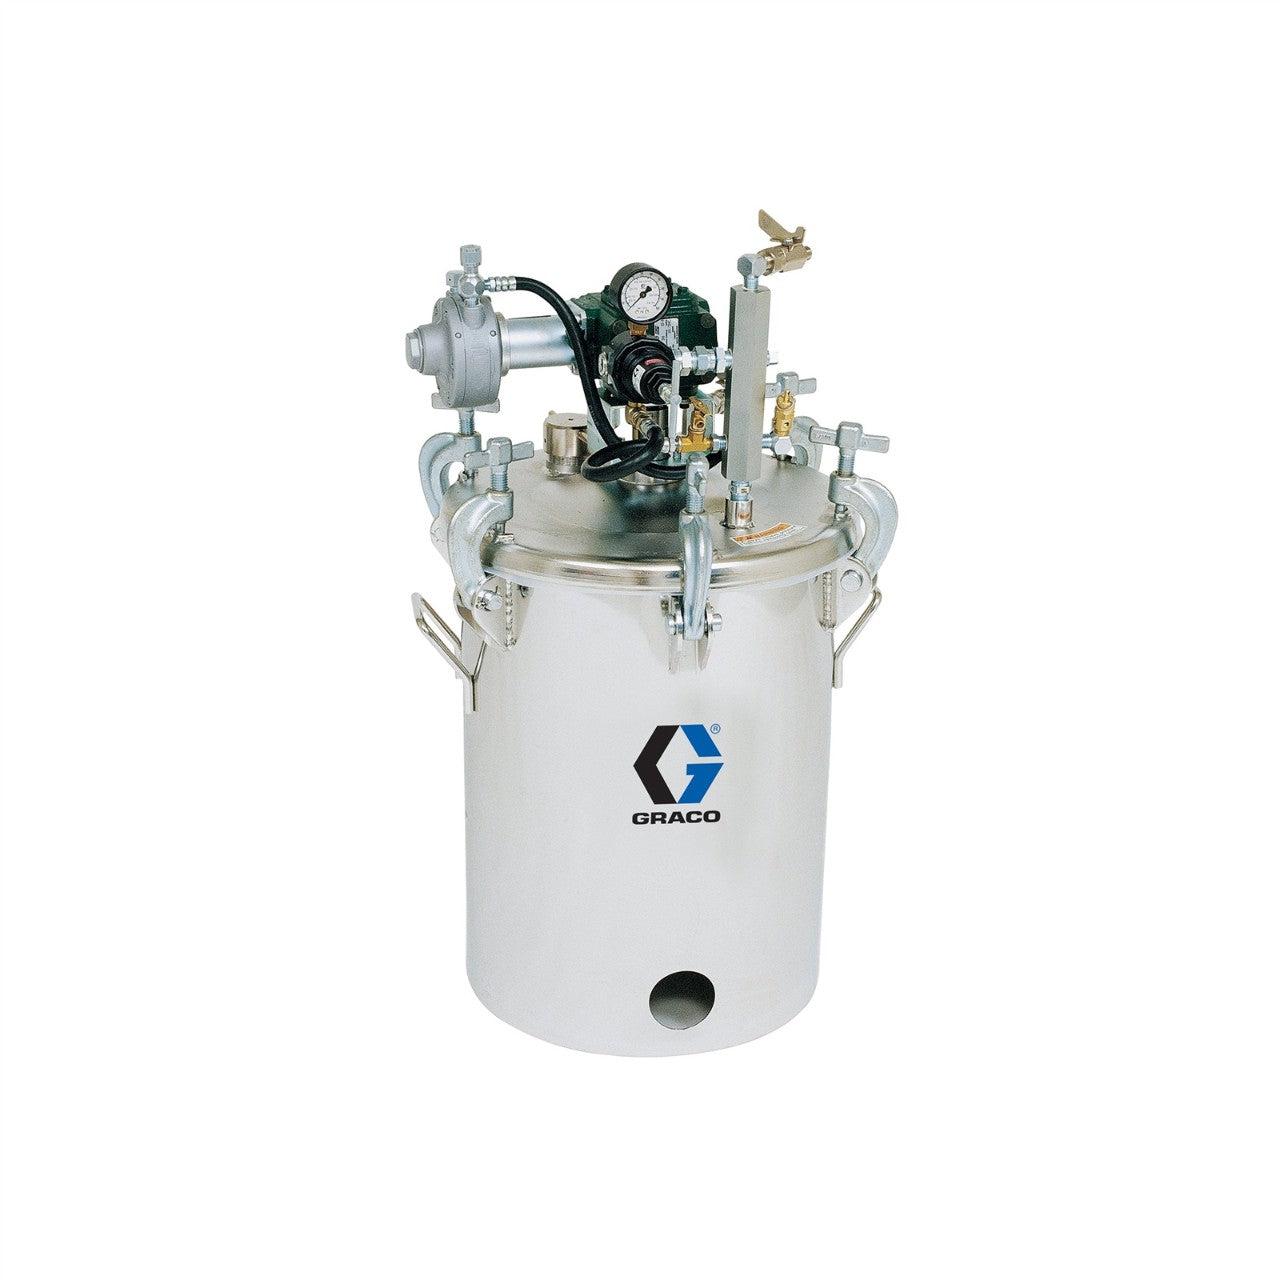 5 Gallon High Pressure (HVLP) Pot with Agitator, Regulated to 100 psi, ASME Rated, 30.5 in (77.5 cm), 74 lbs (34 kg), SST